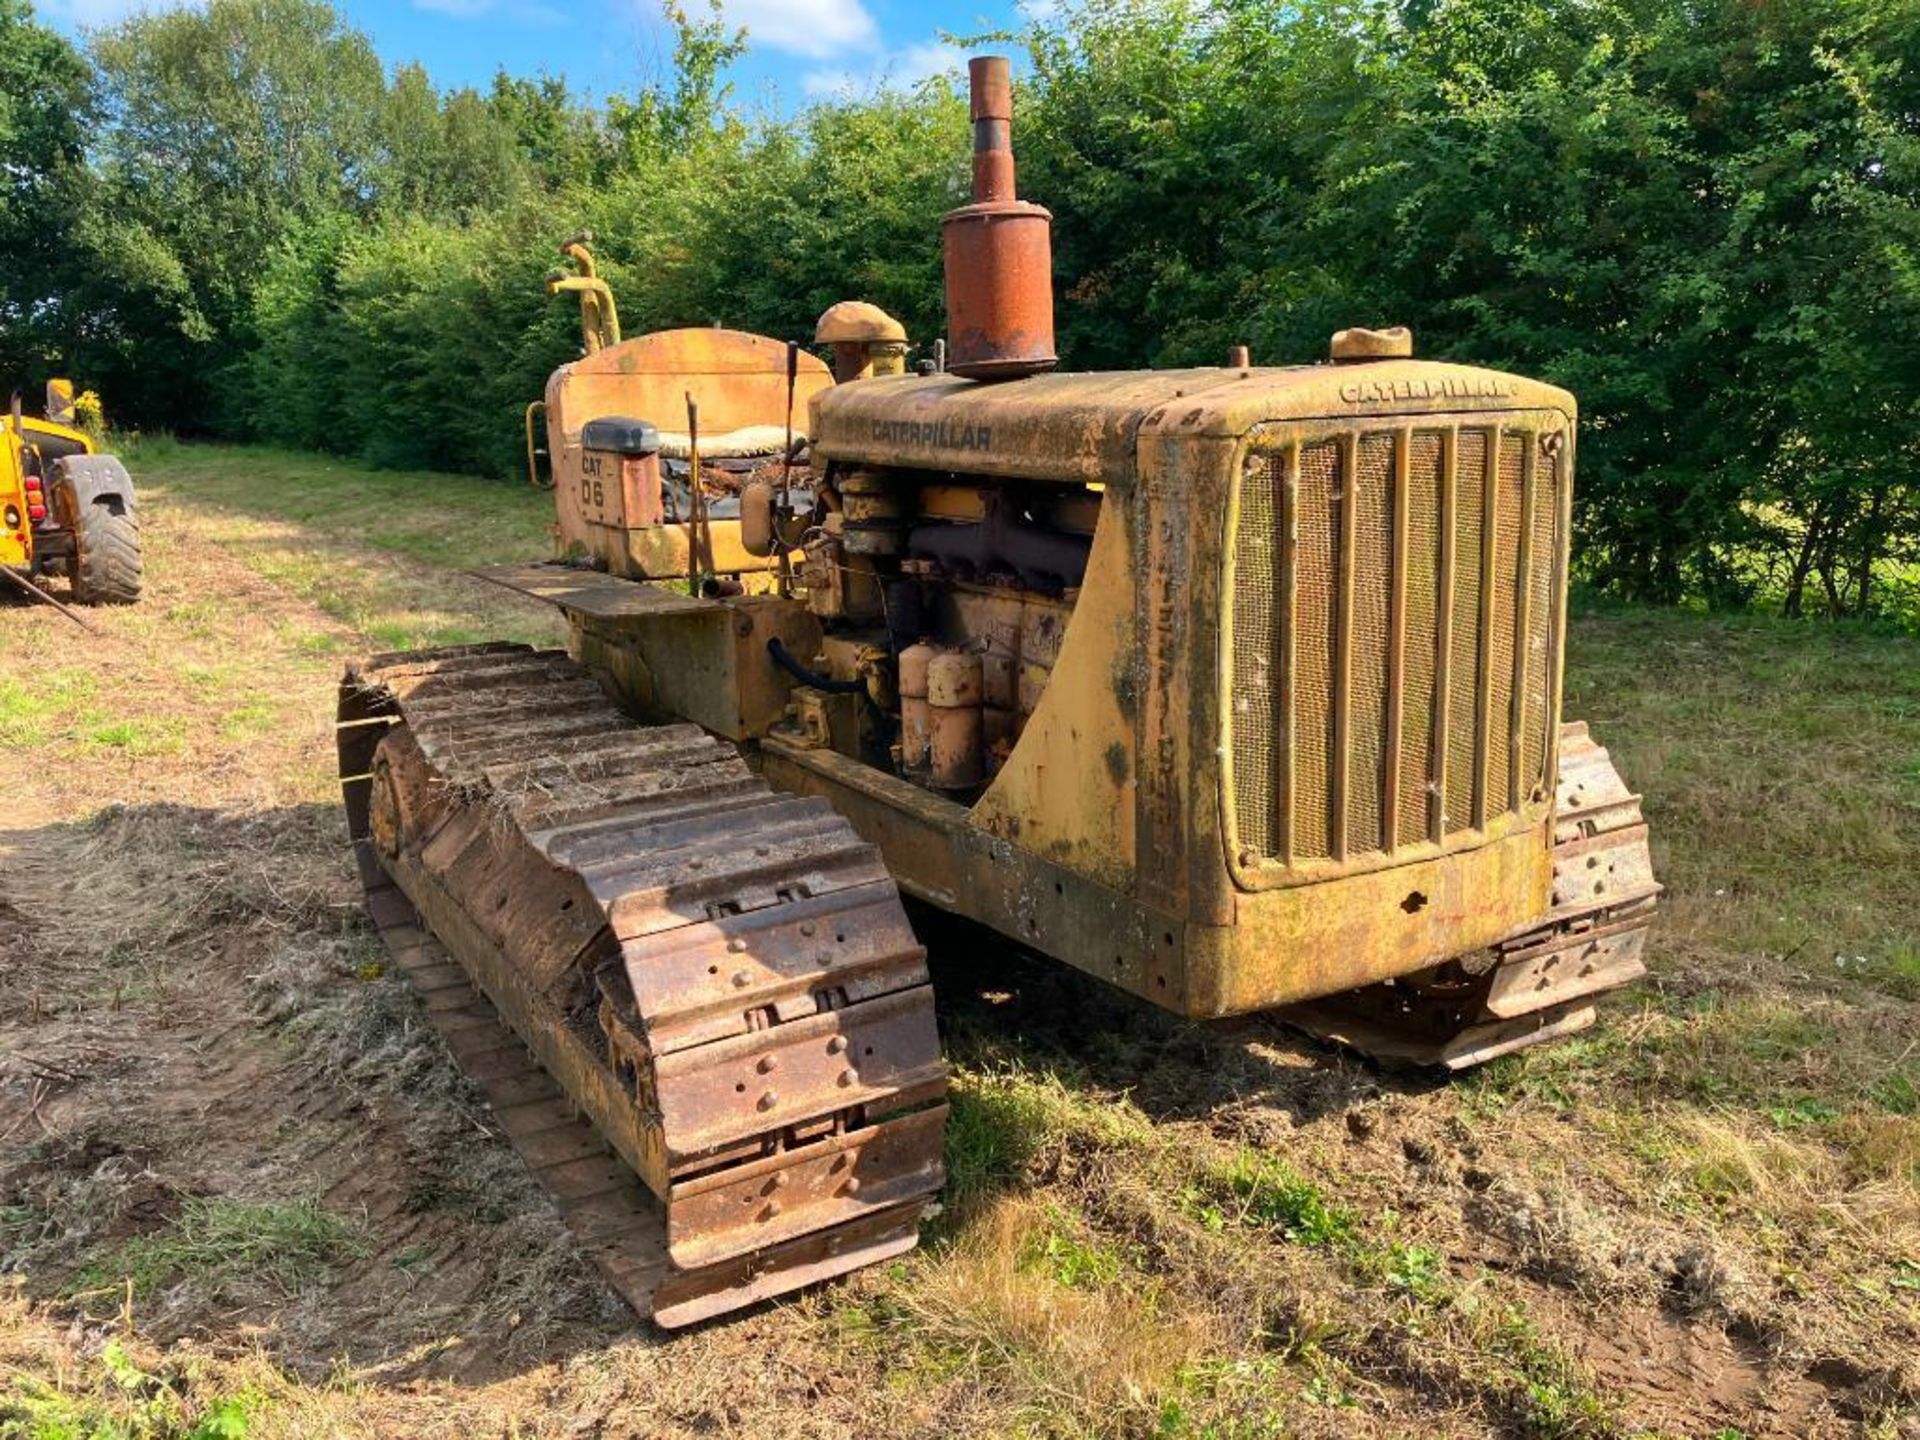 Caterpillar D6 metal tracked crawler with 20" tracks,swinging drawbar and rear winch - Image 11 of 12